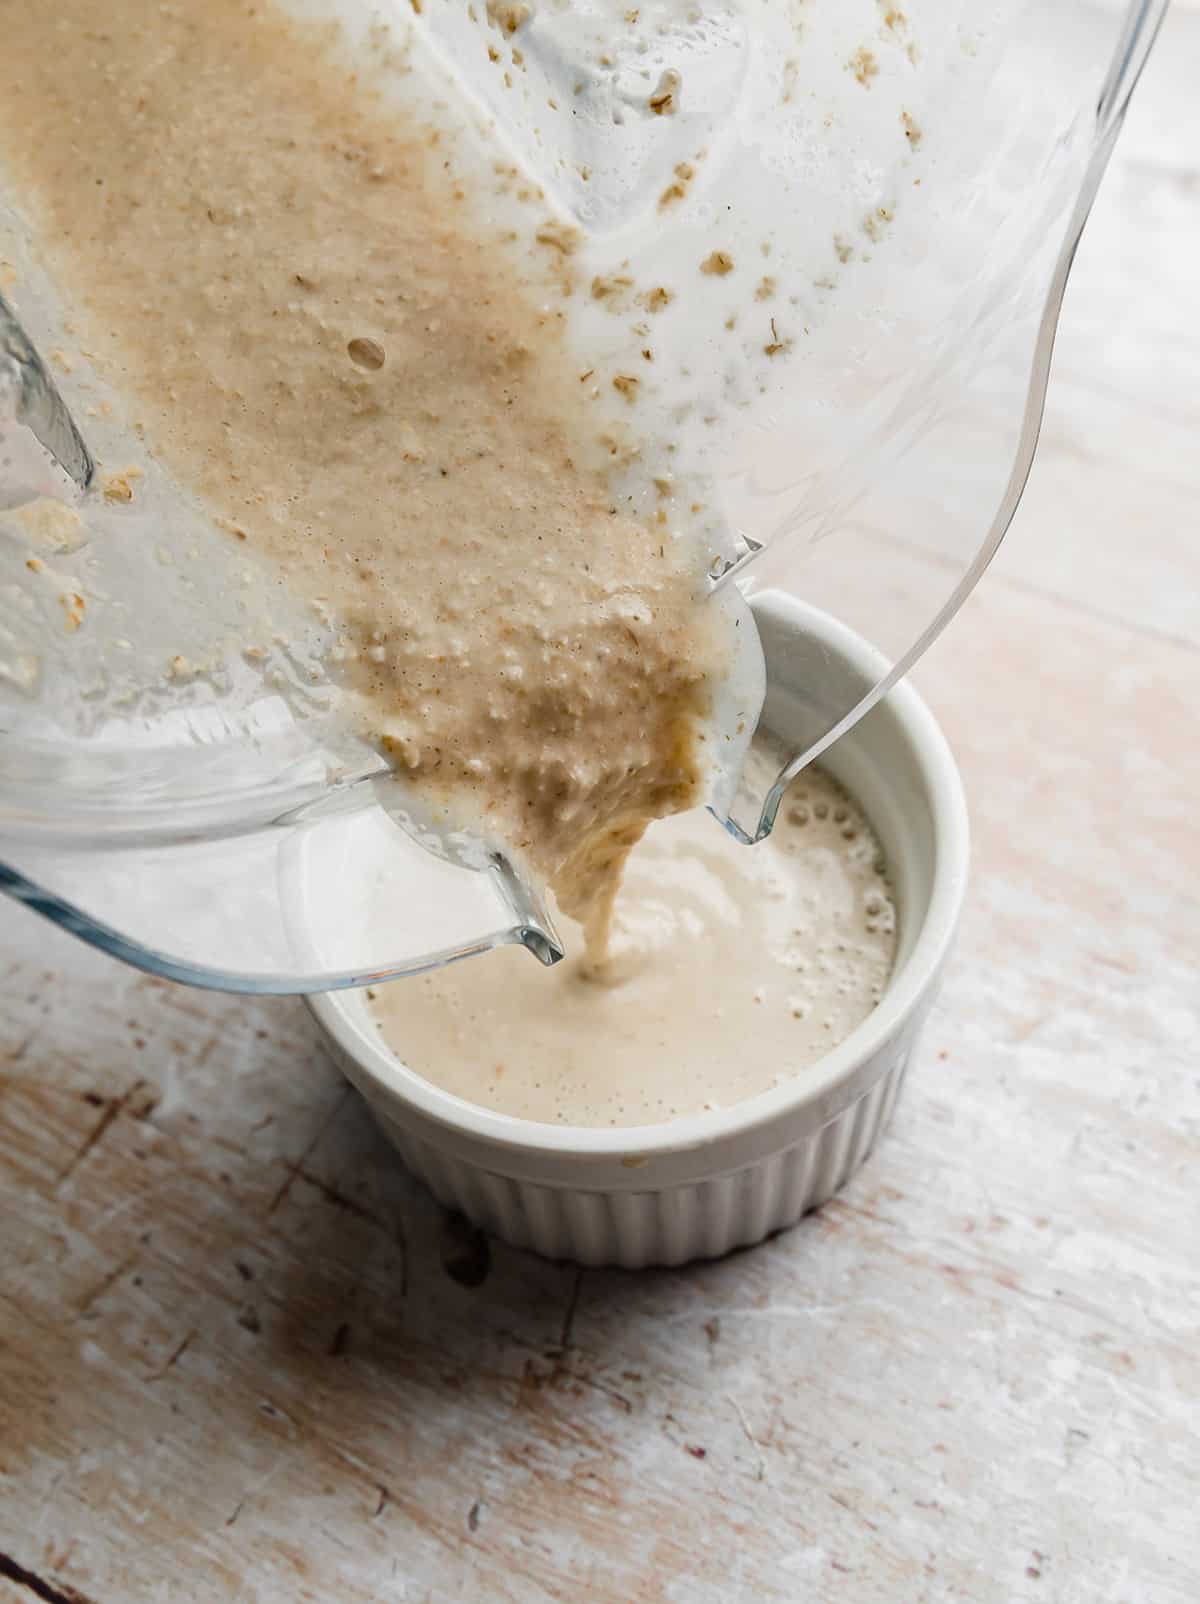 Baked oats mixture being poured into a white ramekin from a blender.